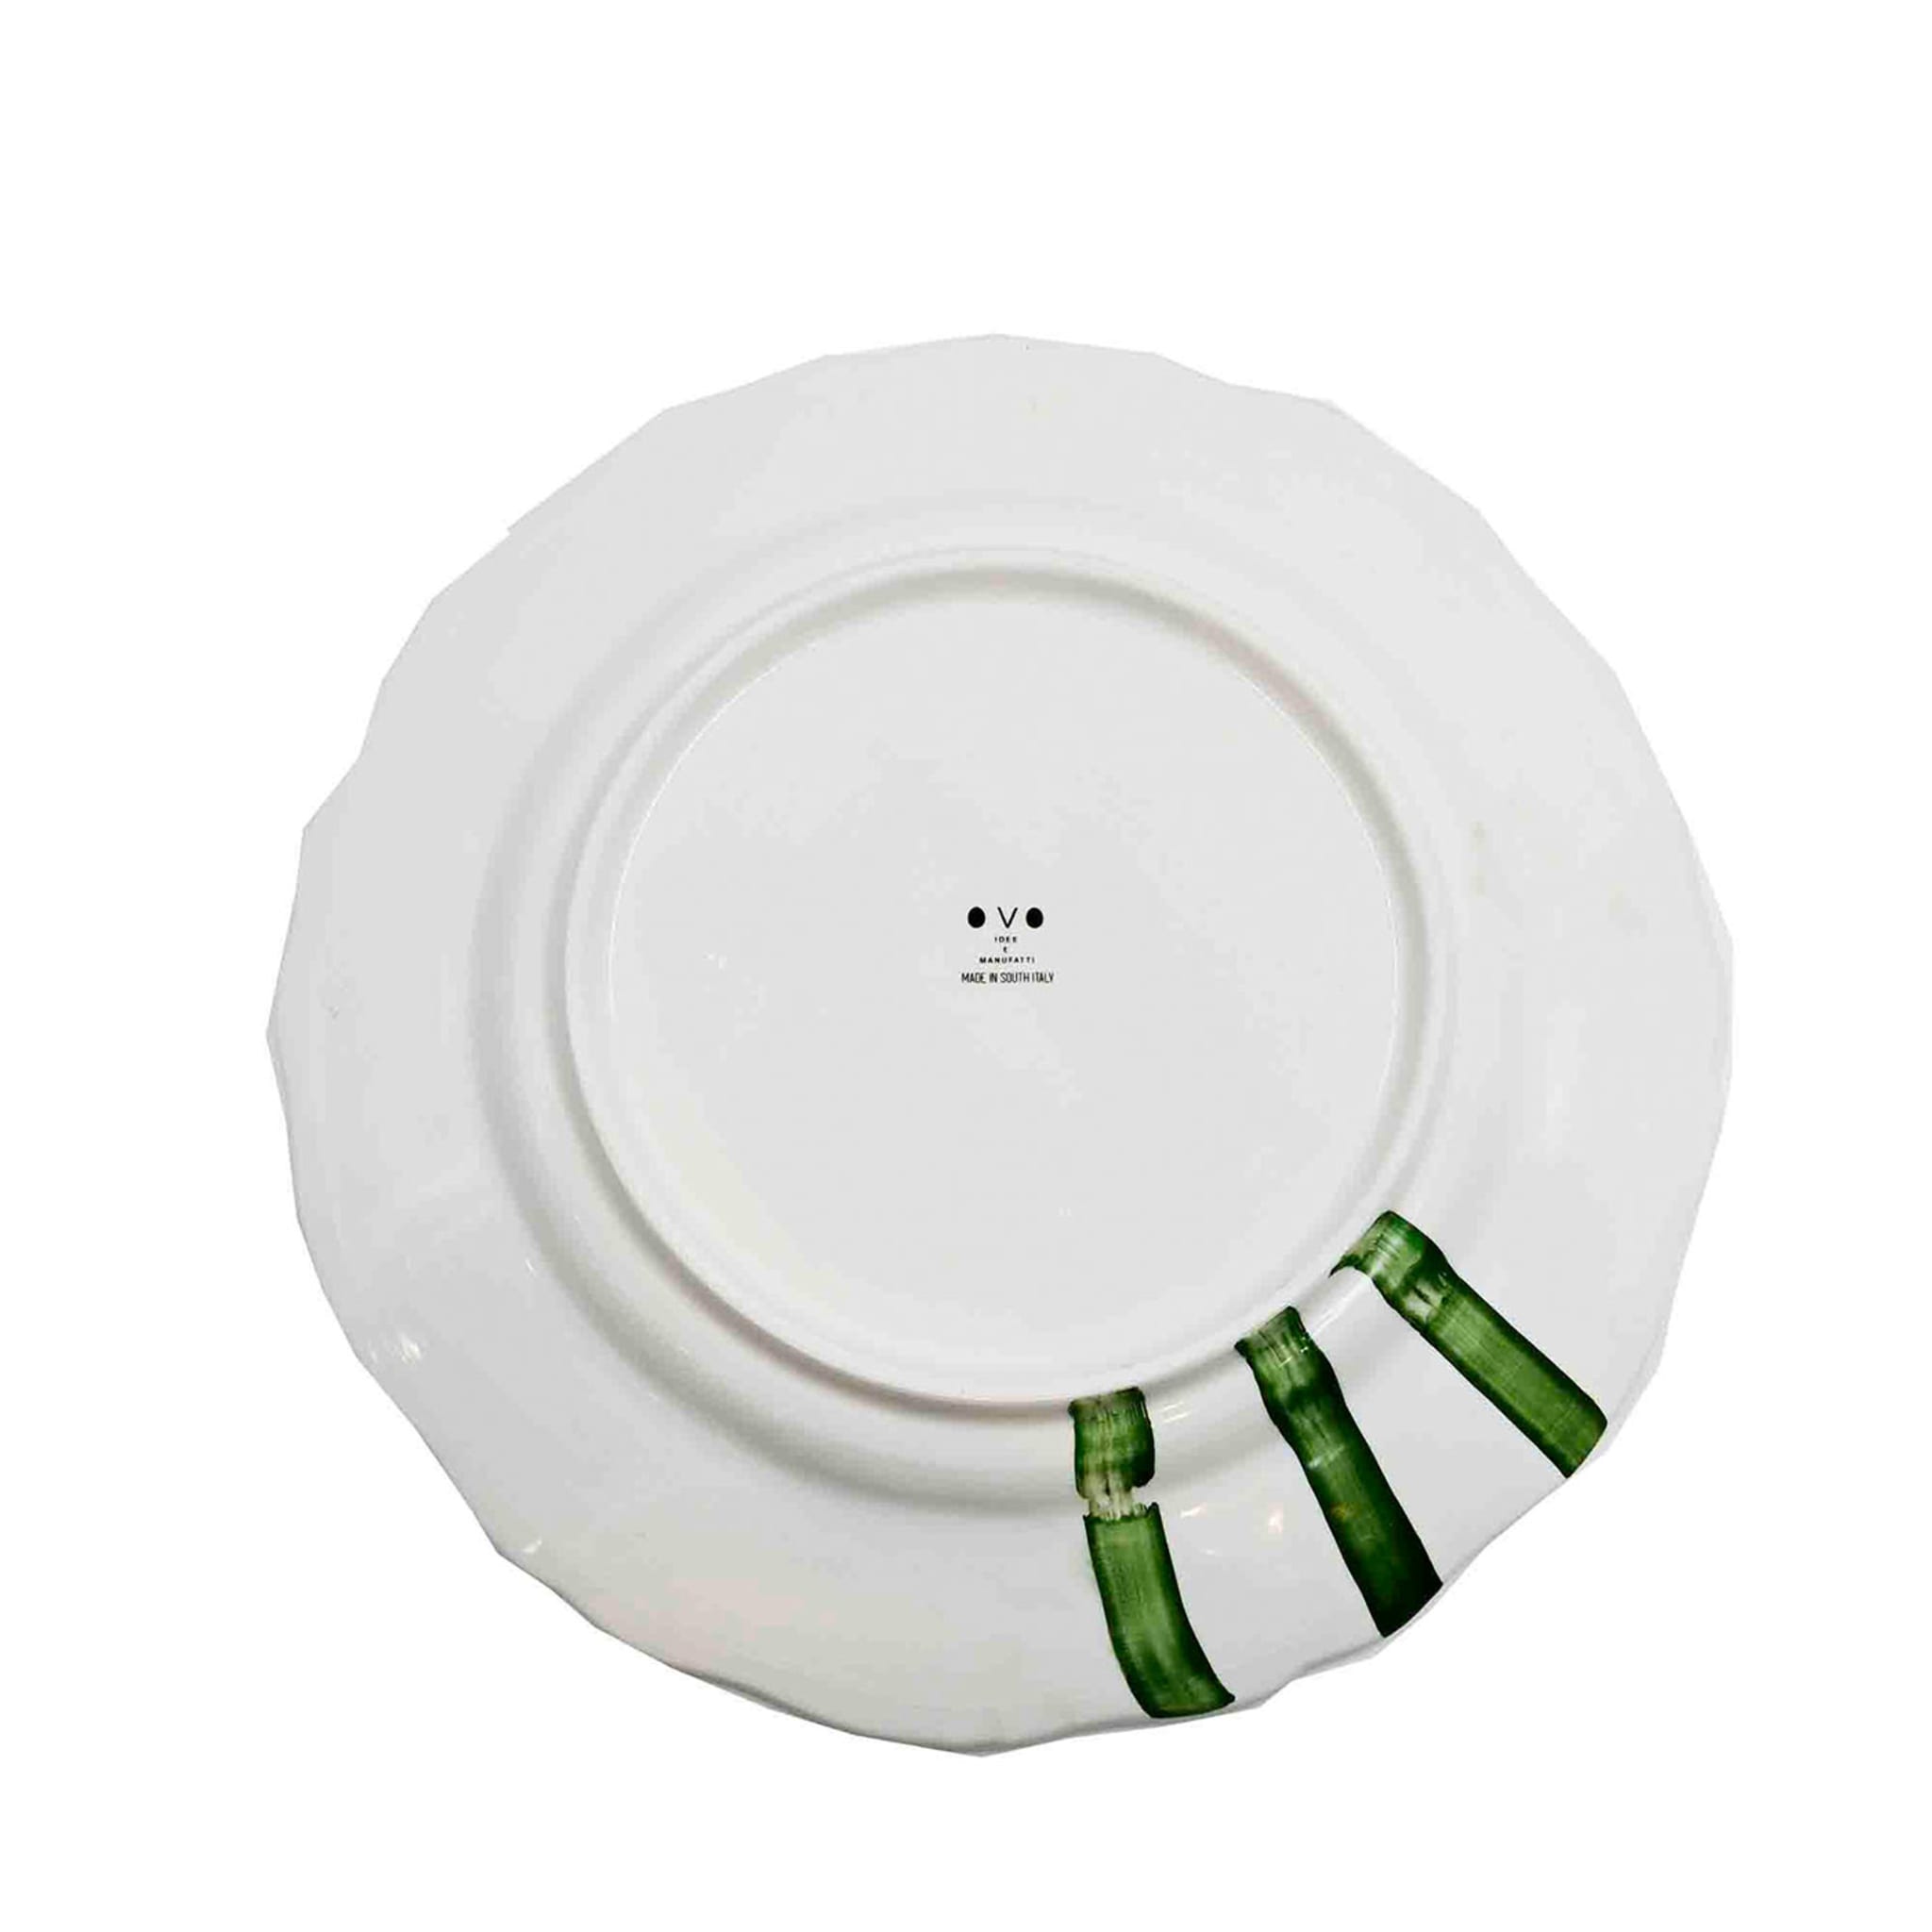 Black/Green/Brown Brushstrokes White Charger Plate - Alternative view 1